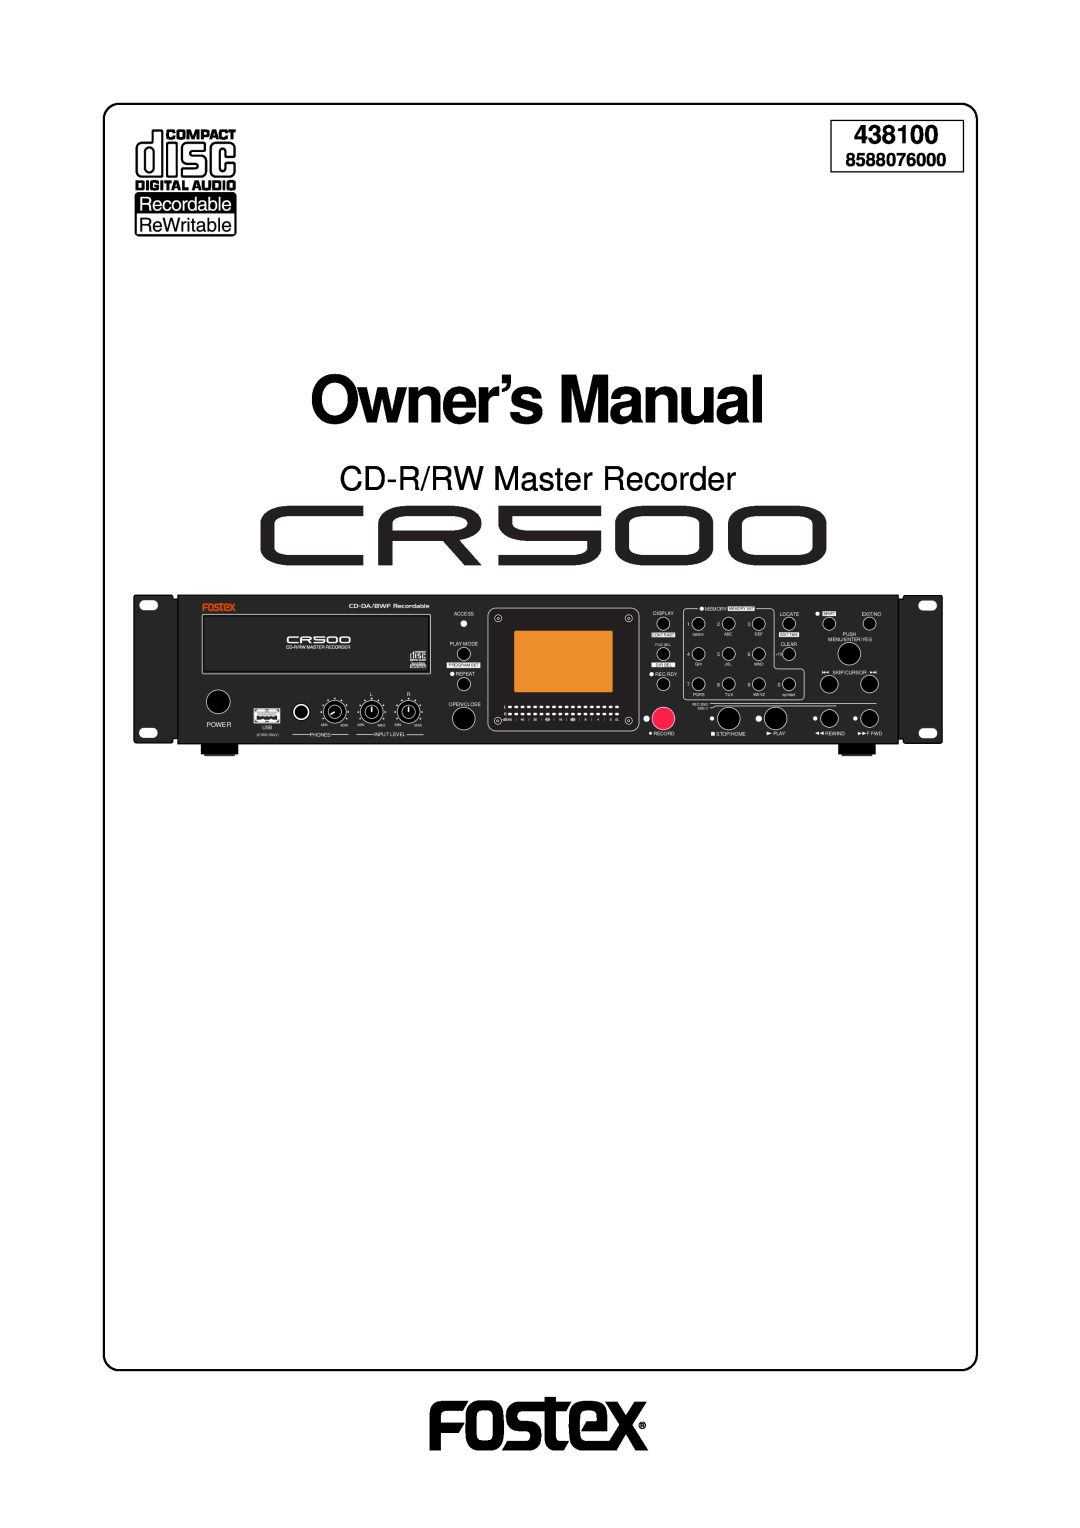 Fostex CR500 owner manual 438100, 8588076000, Owner’s Manual, CD-R/RWMaster Recorder, Power 